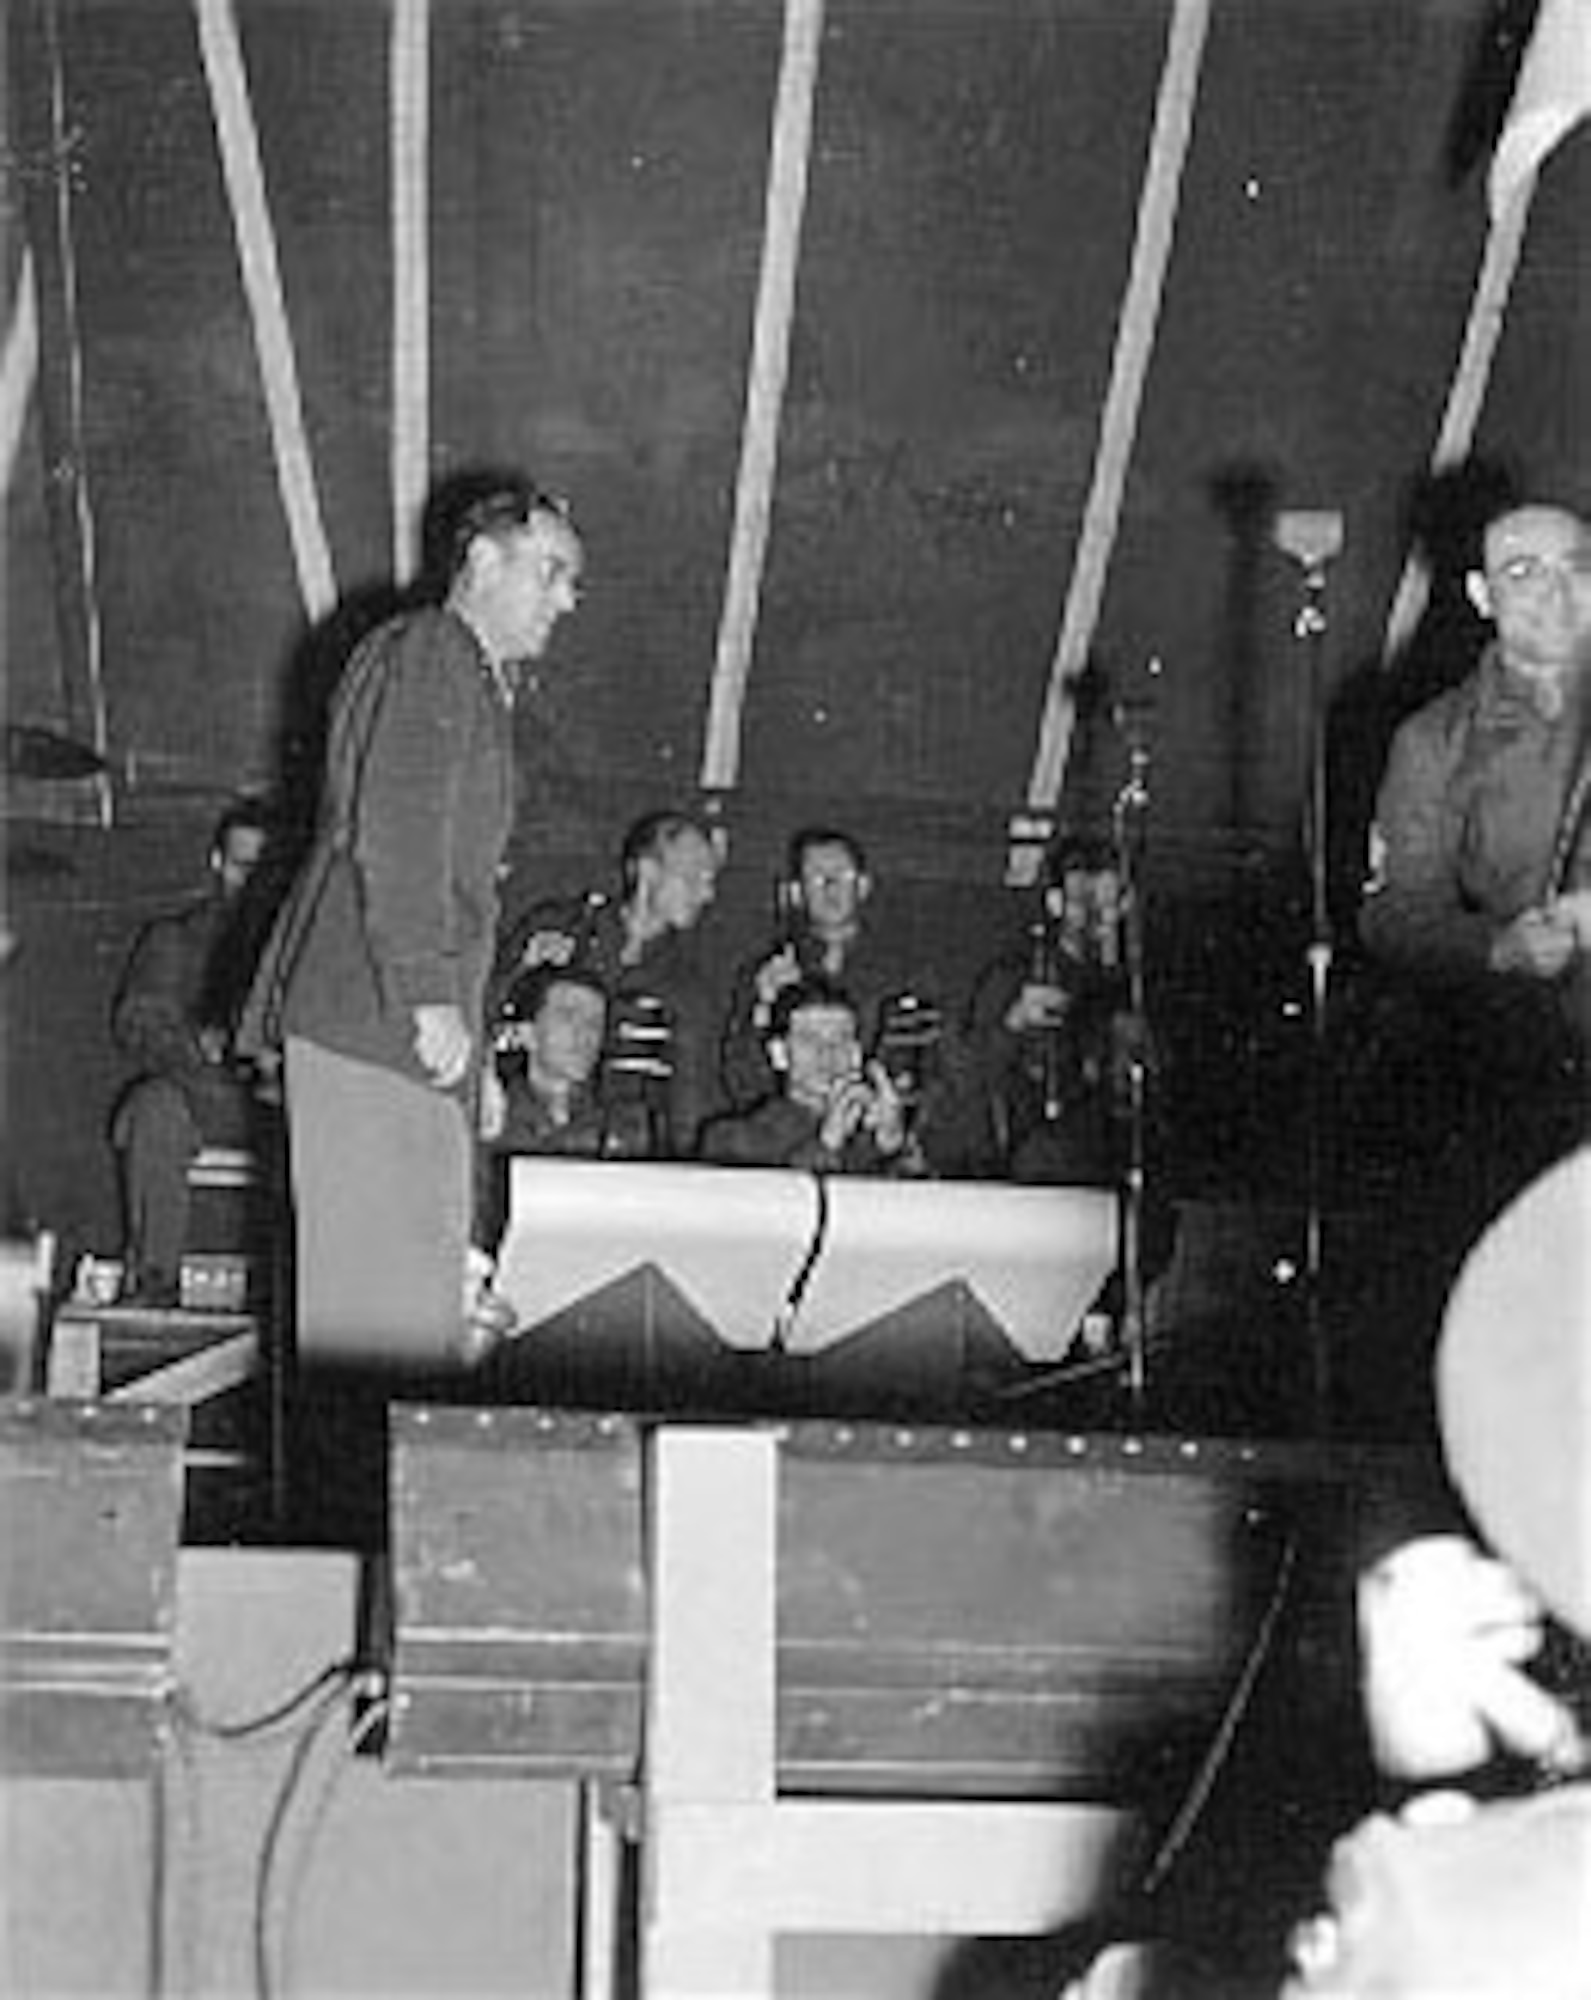 A soldier in the audience takes a photograph of Maj. Glenn Miller as band leader. (U.S. Air Force photo)